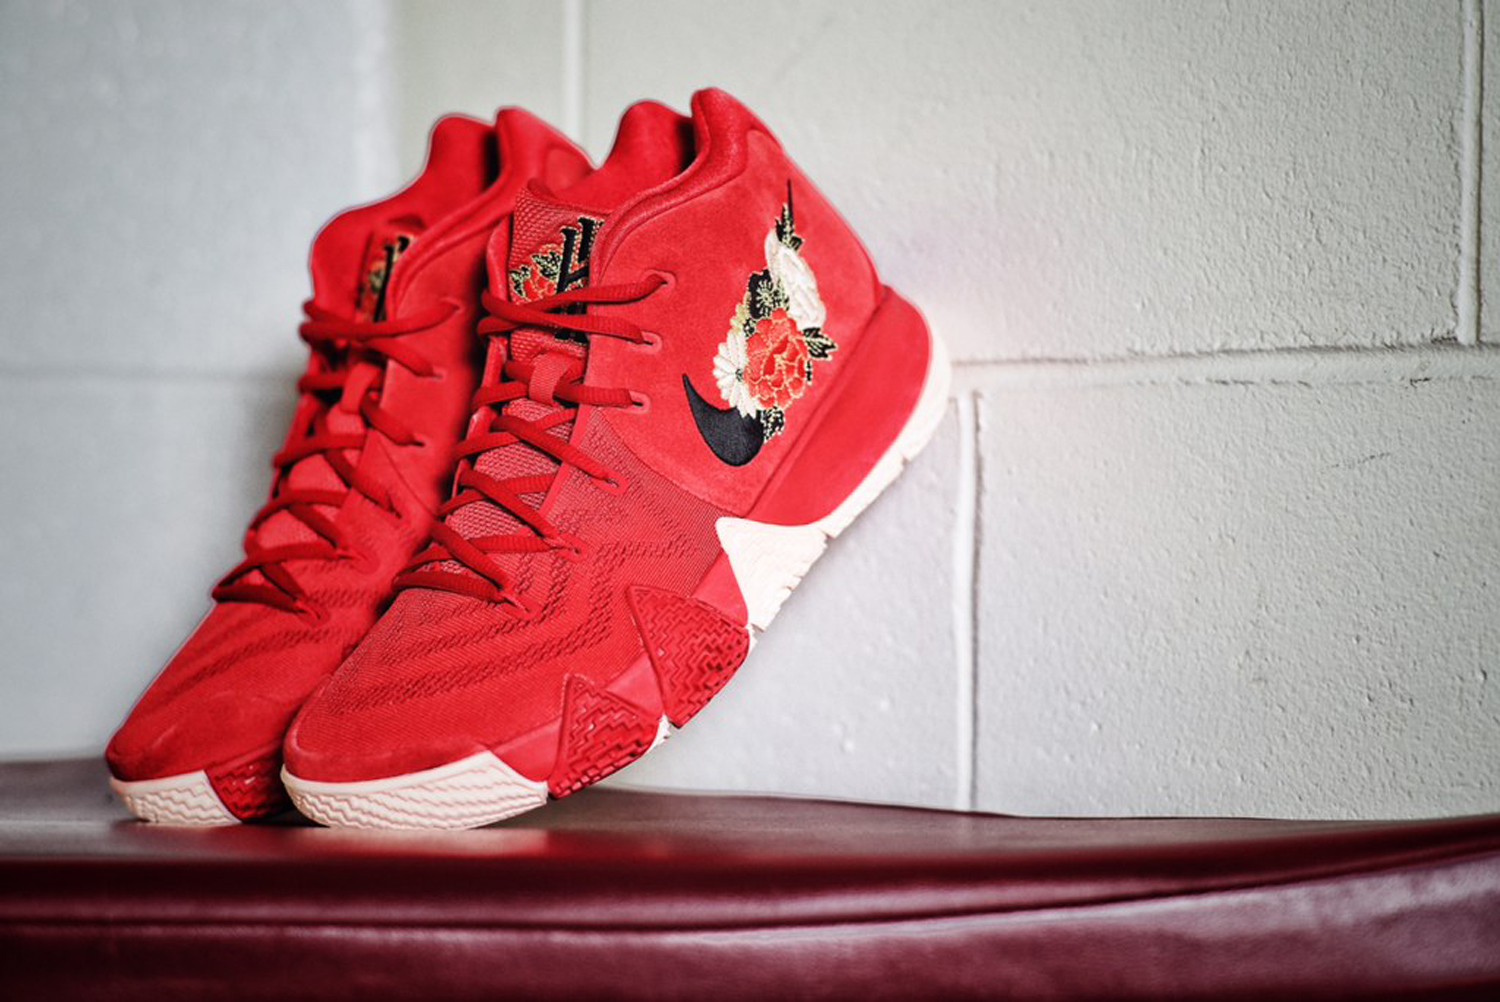 This Nike Kyrie 4 'Chinese New Year' is 